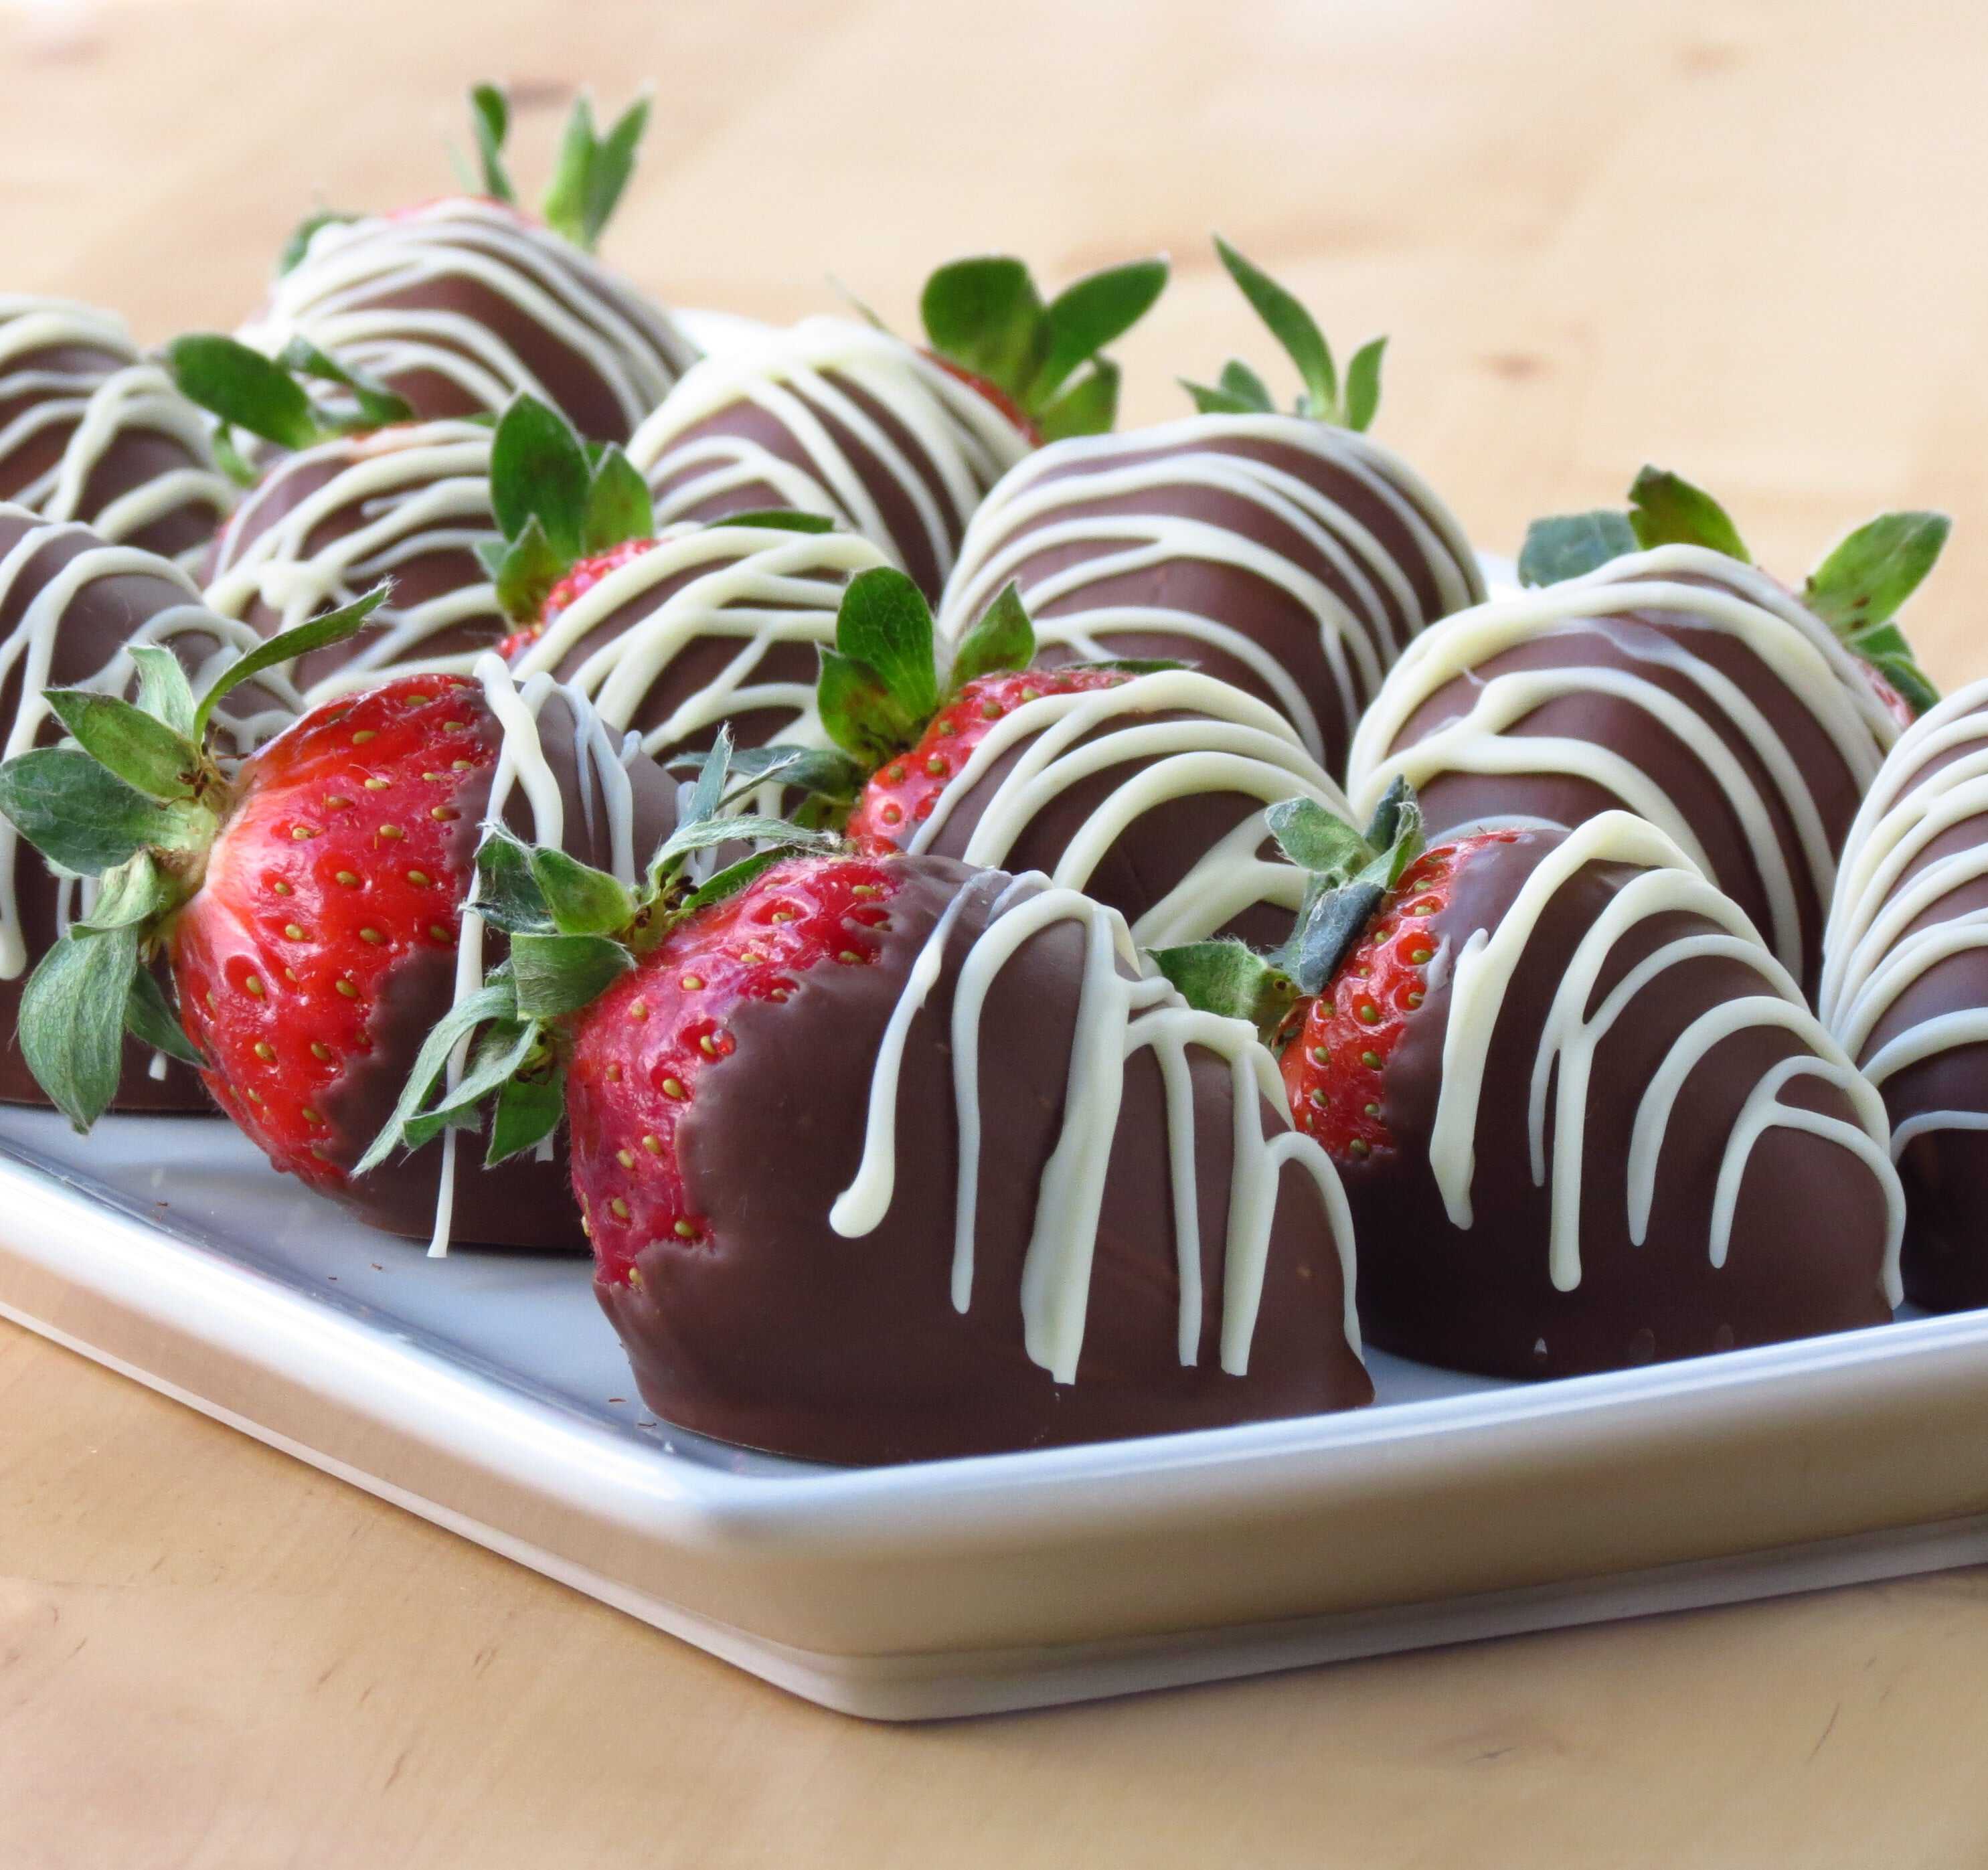 Chocolate Covered Strawberries on a rectangular plate